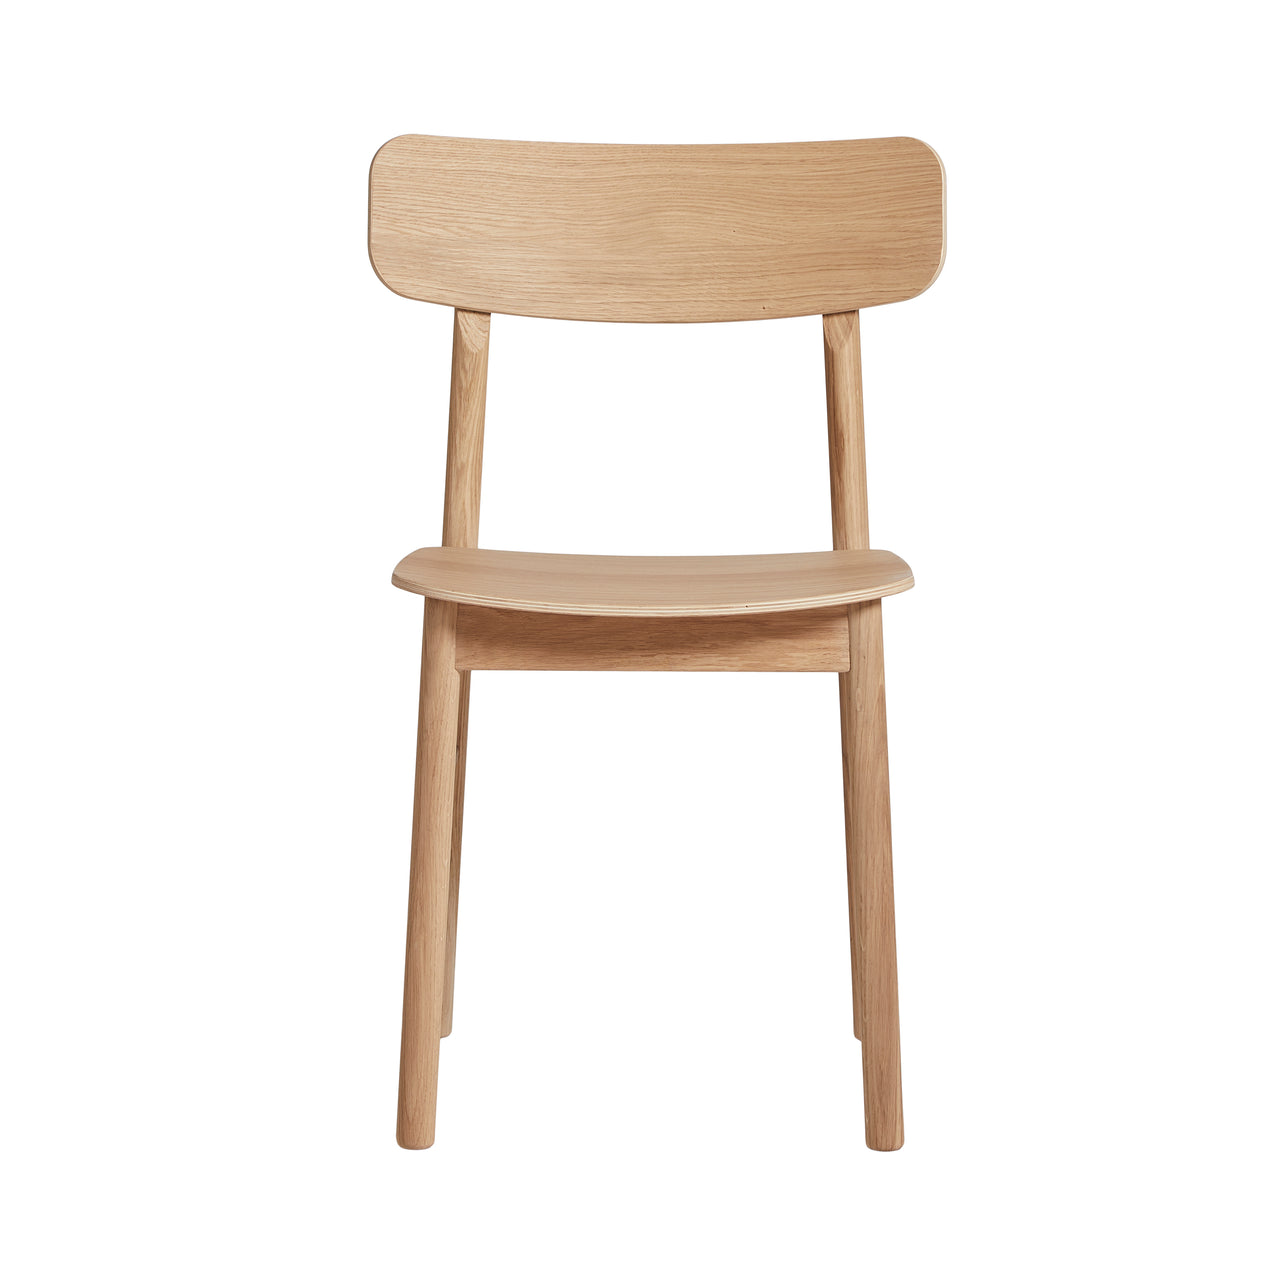 Soma Dining Chair: Set of 2 + White Pigmented Oak + Without Seatpad